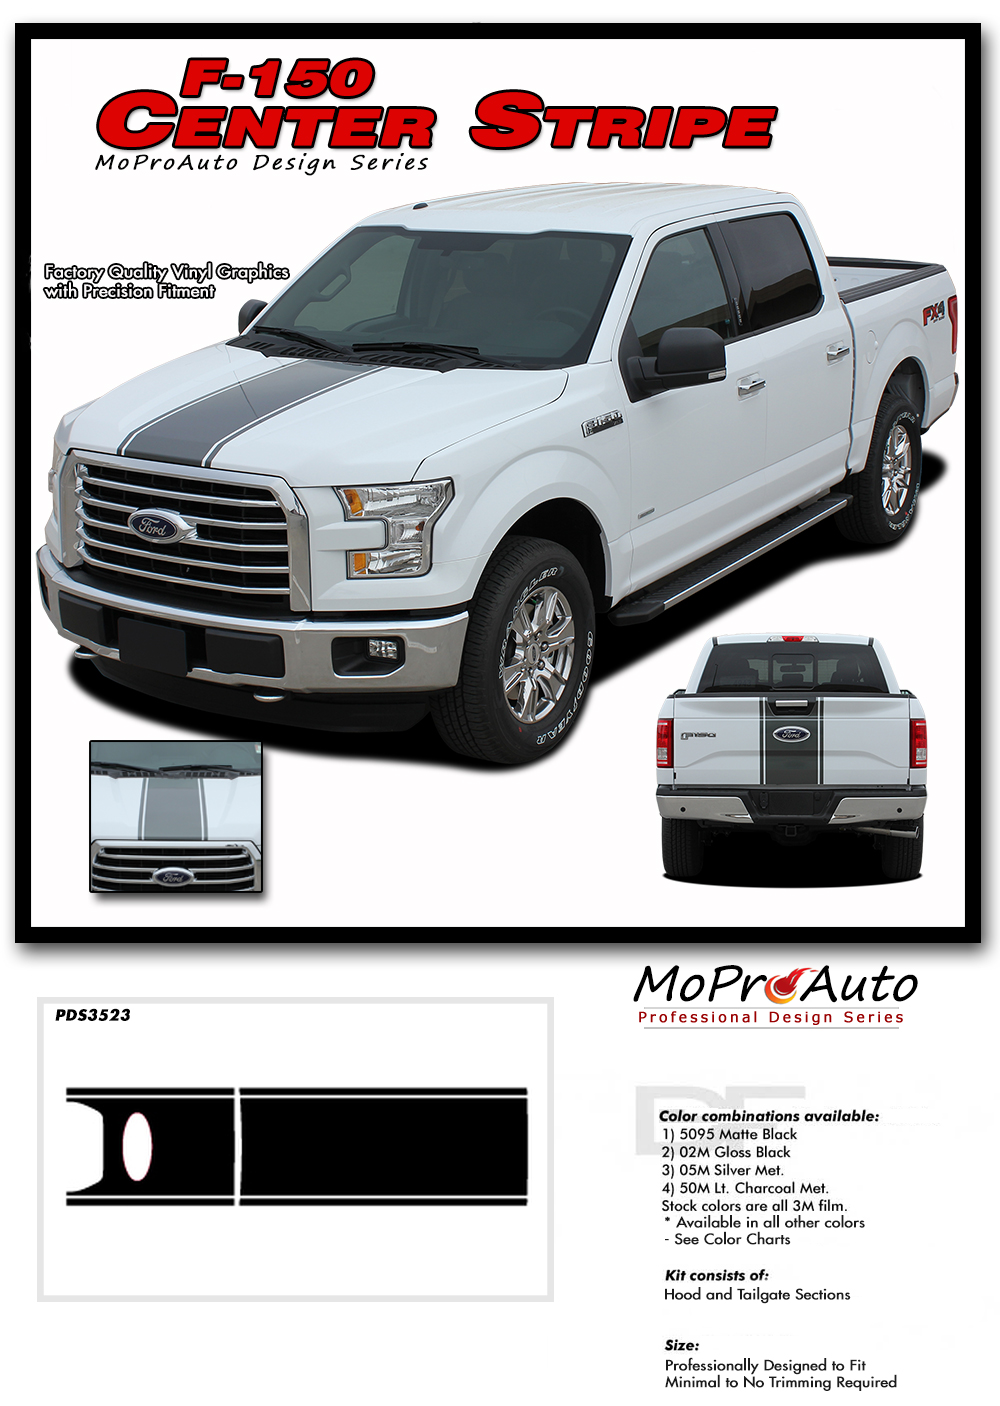 2015 2016 2017 2018 Ford F-Series F-150 - MoProAuto Pro Design Series Vinyl Graphics and Decals Kit